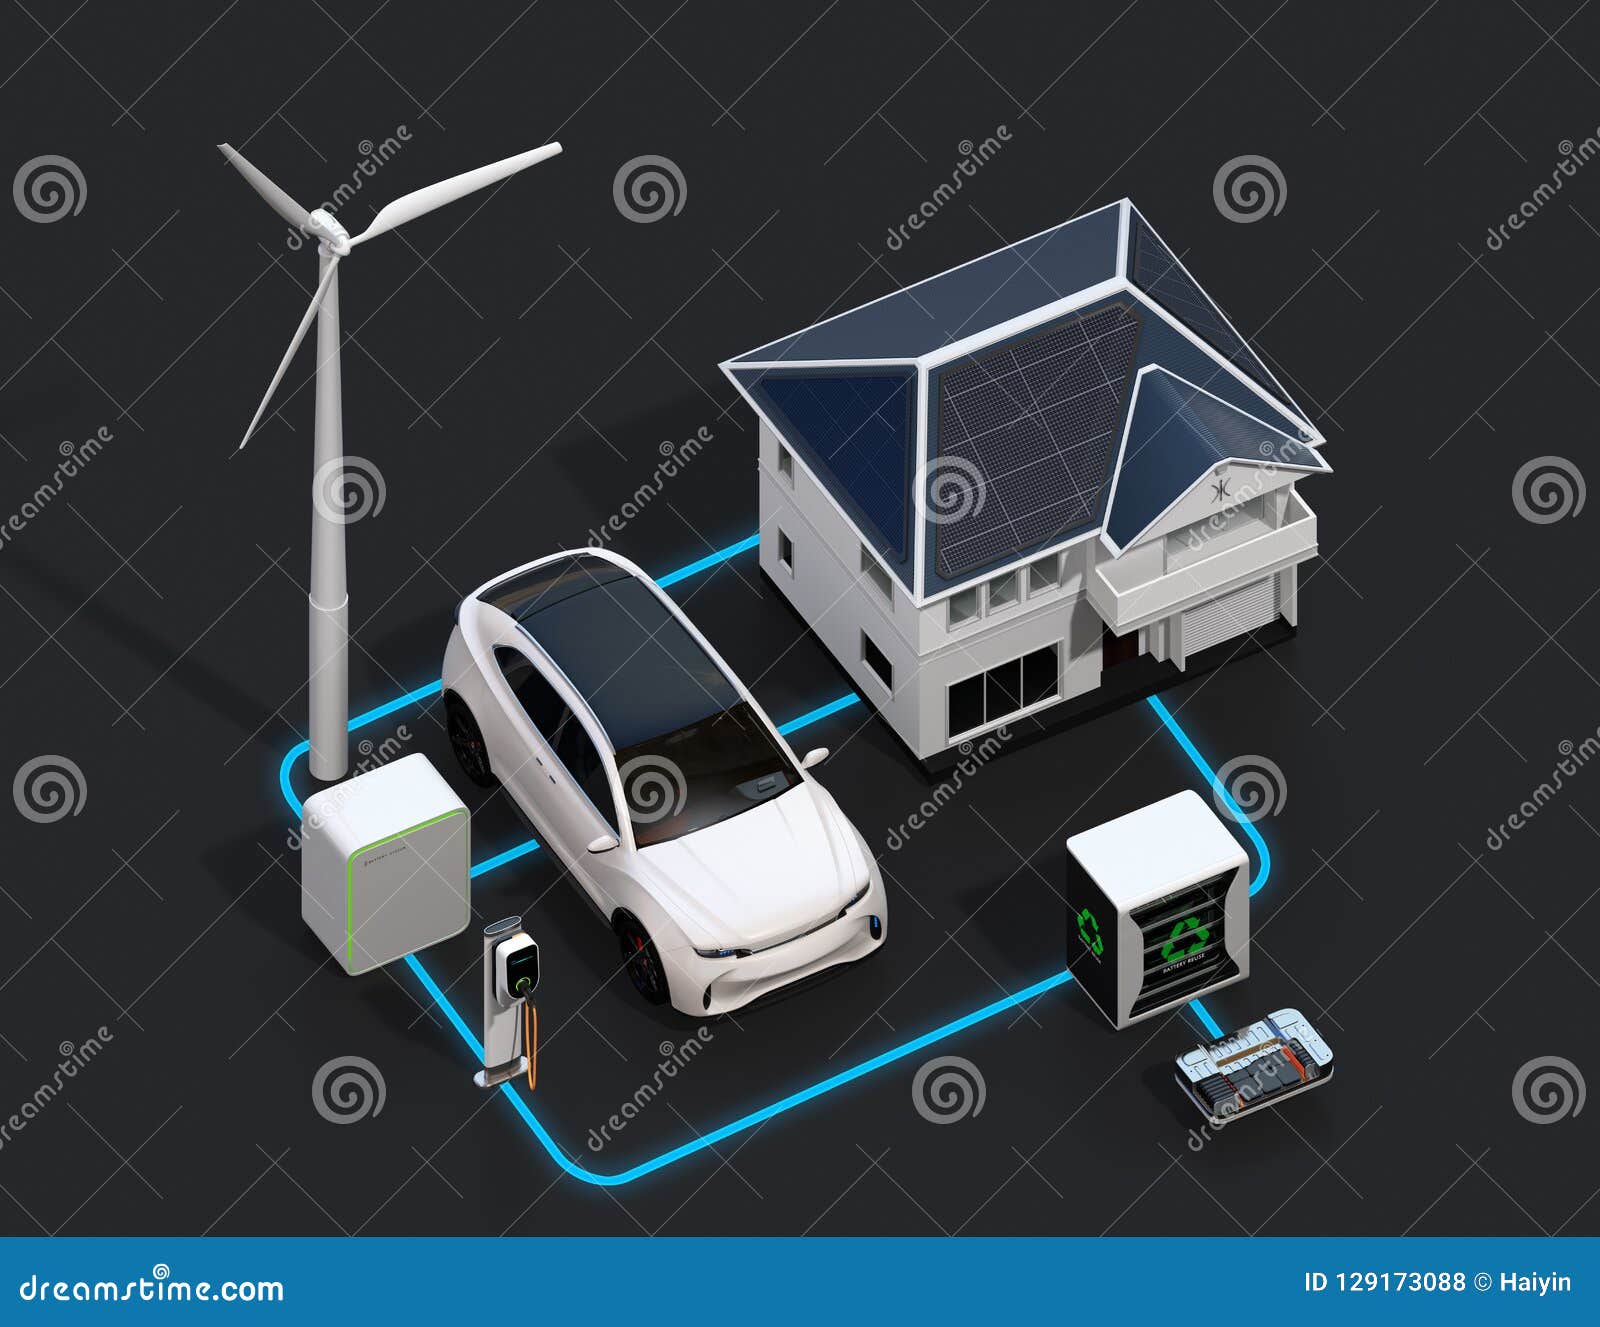 renewable energy network connected by smart home